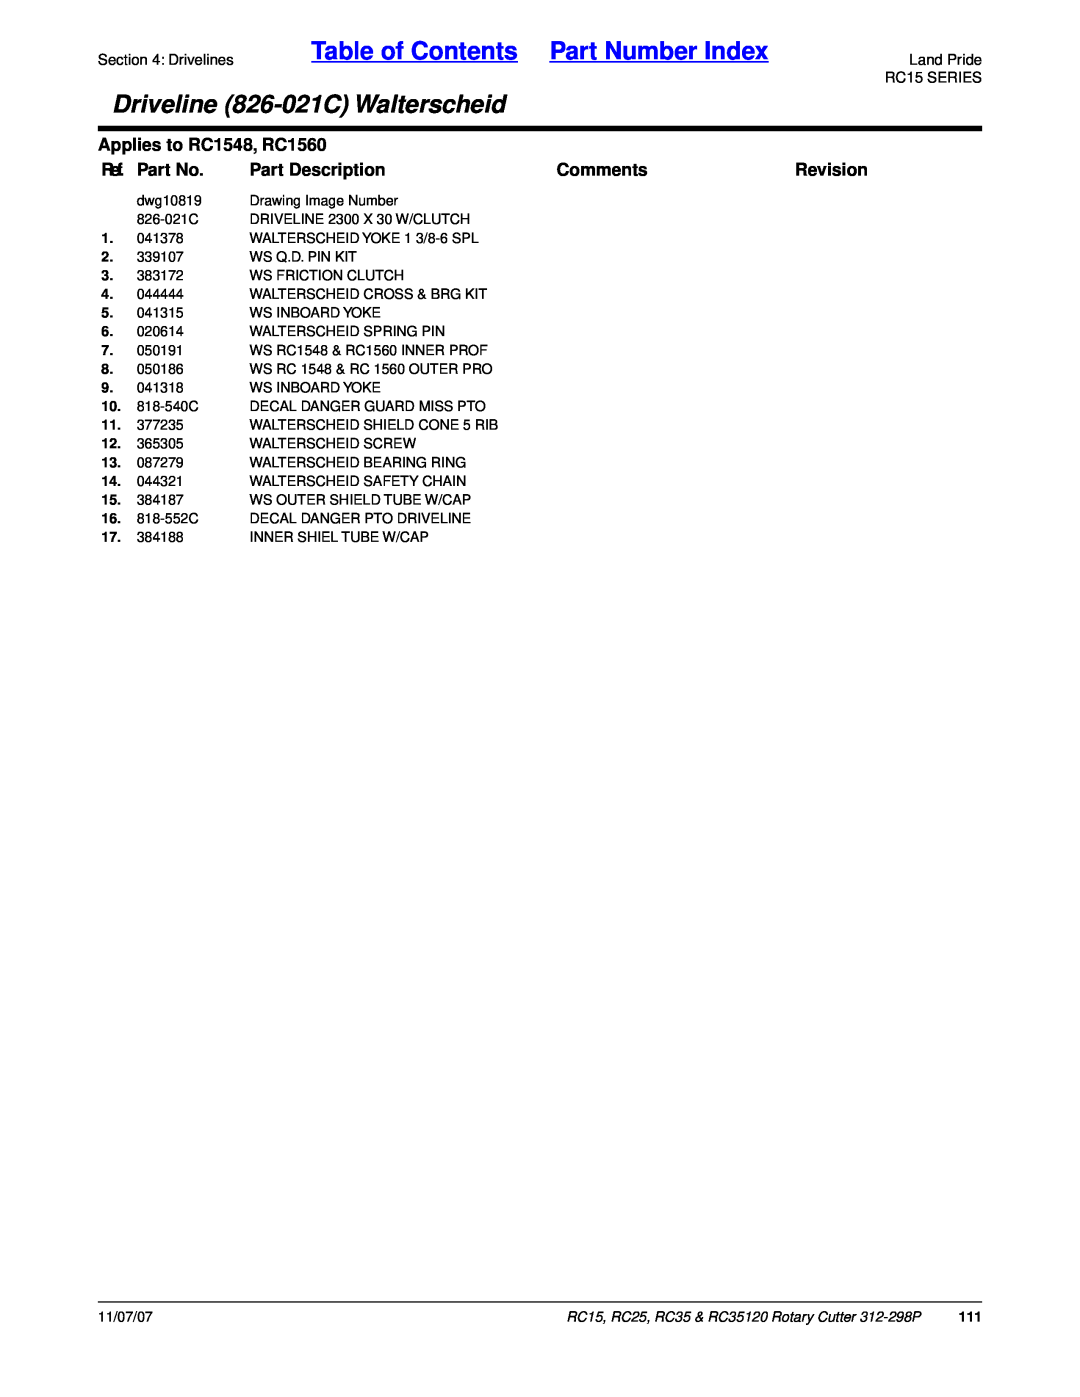 Land Pride Table of Contents Part Number Index, Driveline 826-021CWalterscheid, Applies to RC1548, RC1560, Ref. Part No 